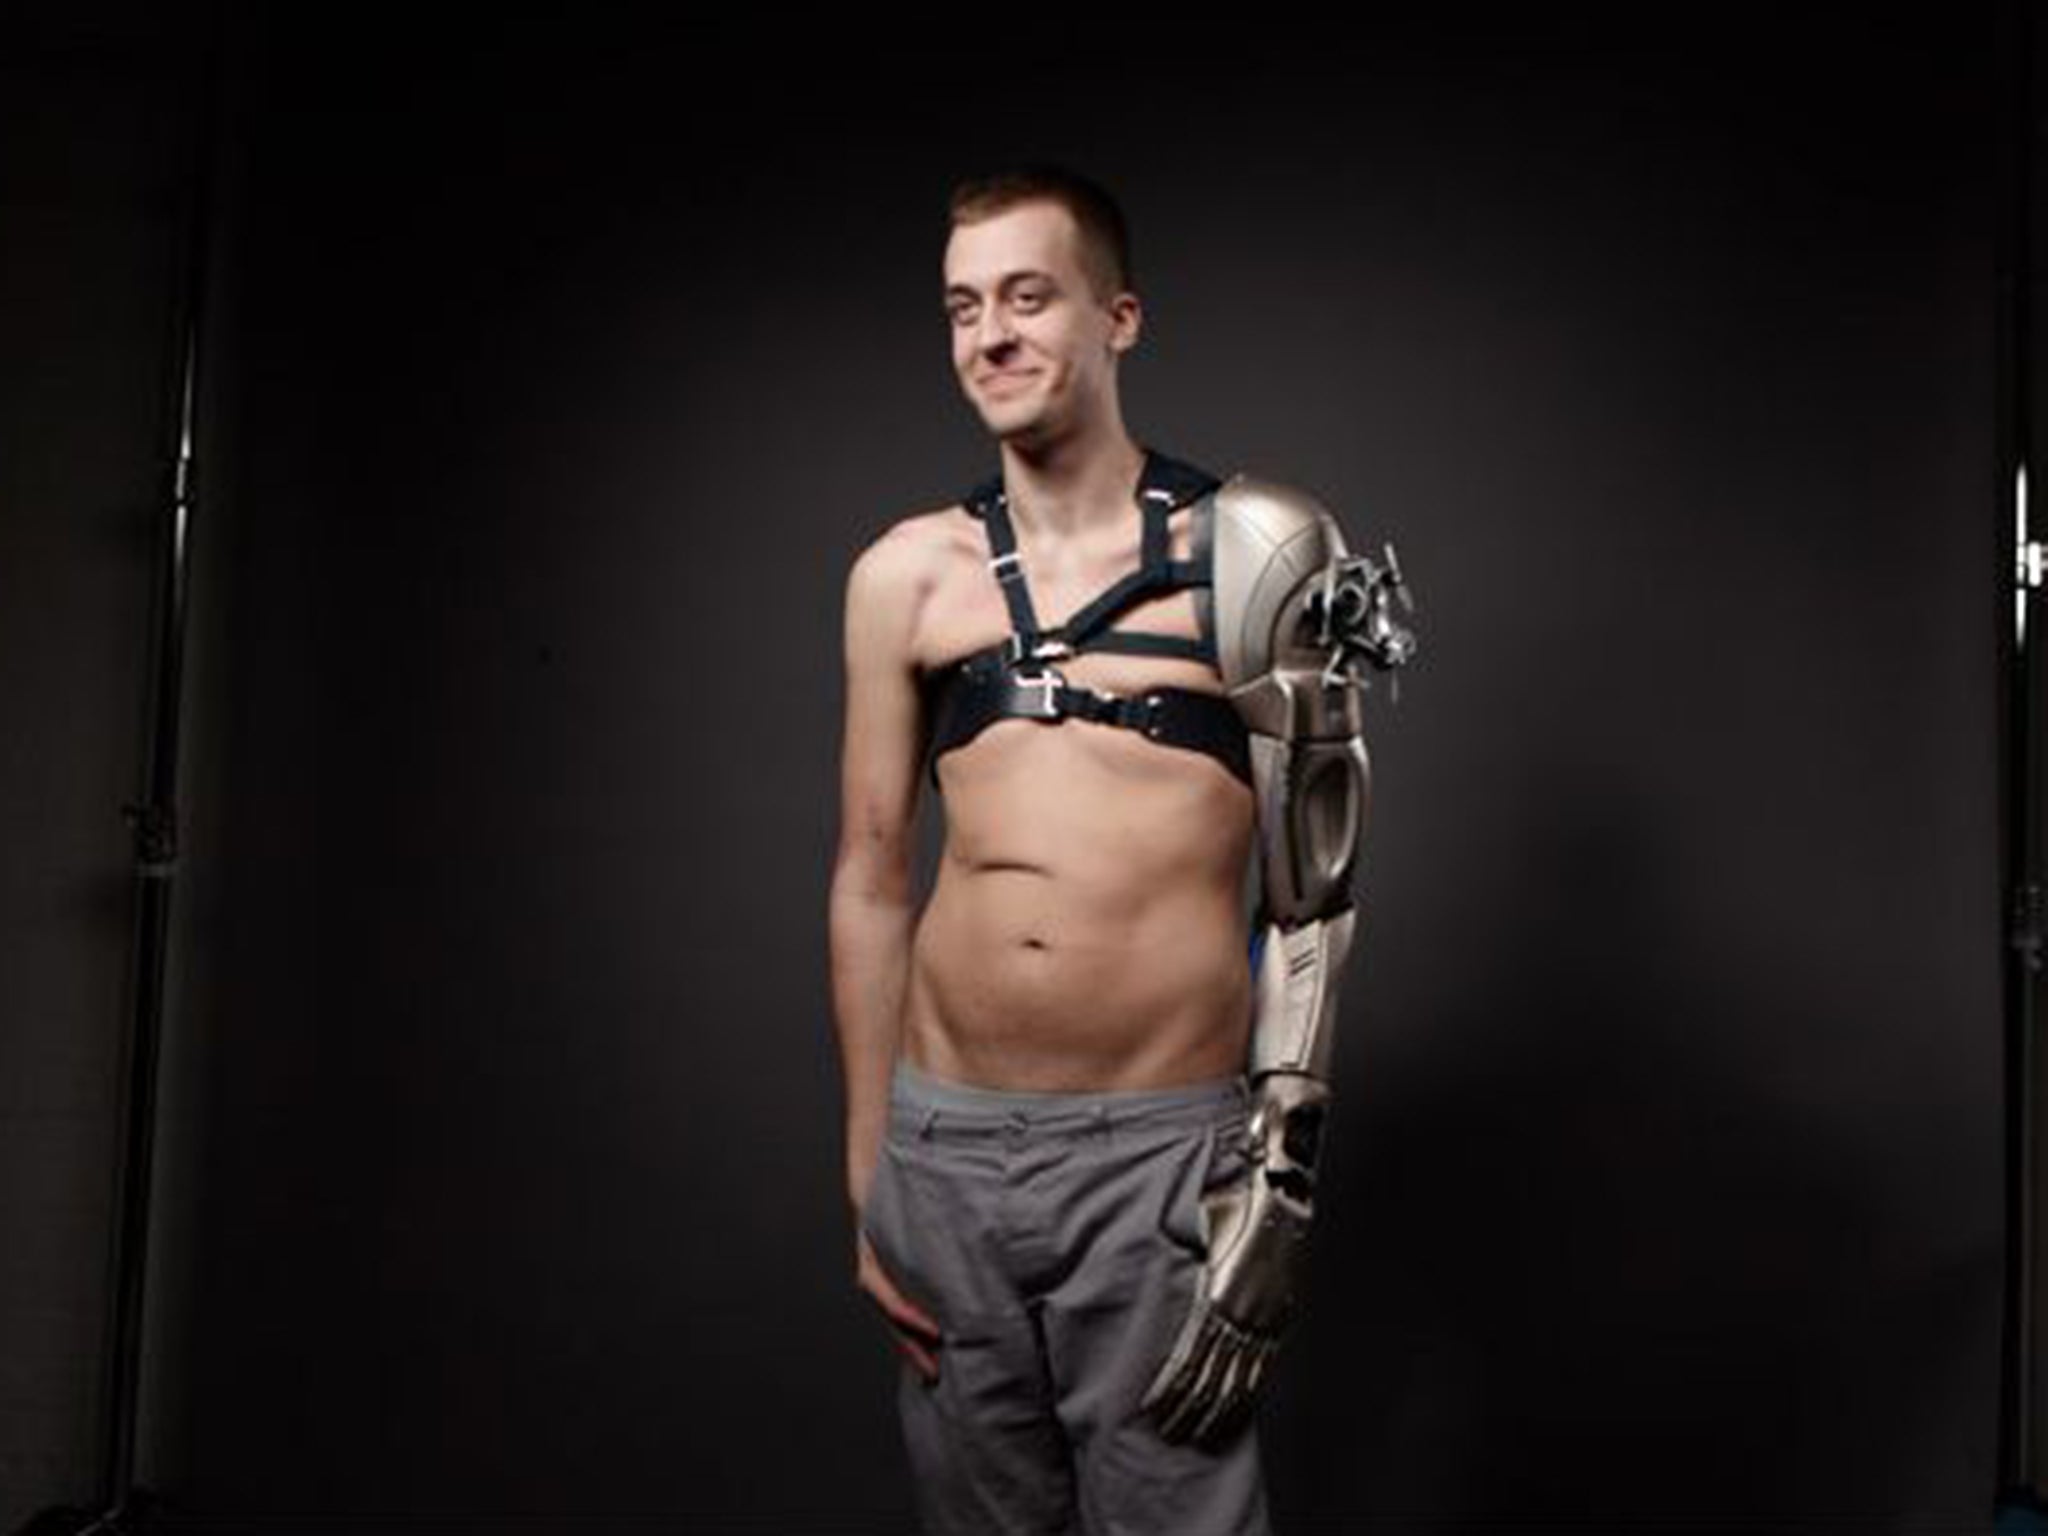 Prosthetics: Amputee James Young unveils hi-tech synthetic arm inspired by  Metal Gear Solid, The Independent